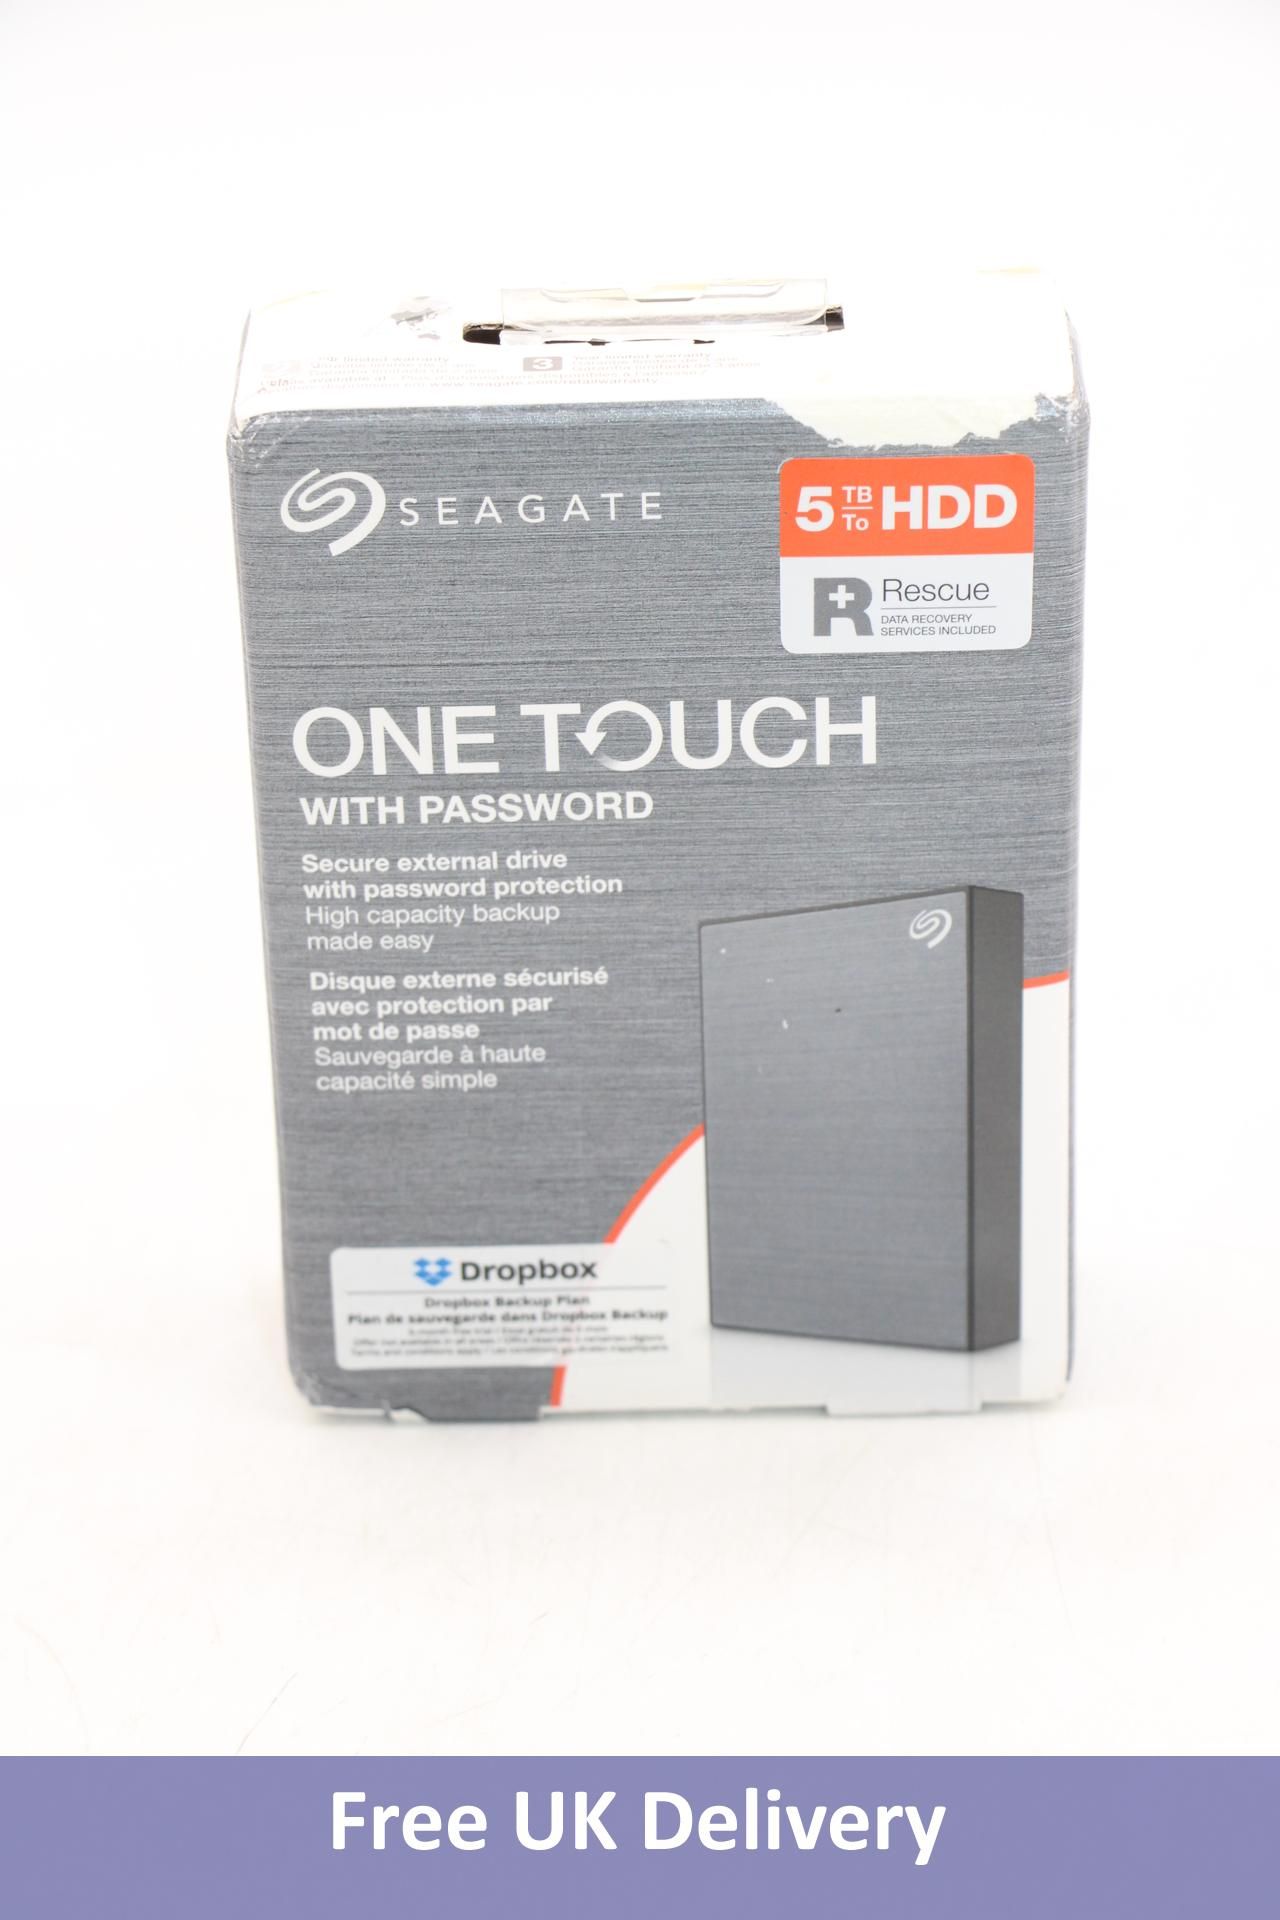 Seagate 5TB HDD, One Touch with Password, USB 3.0, Grey/Black